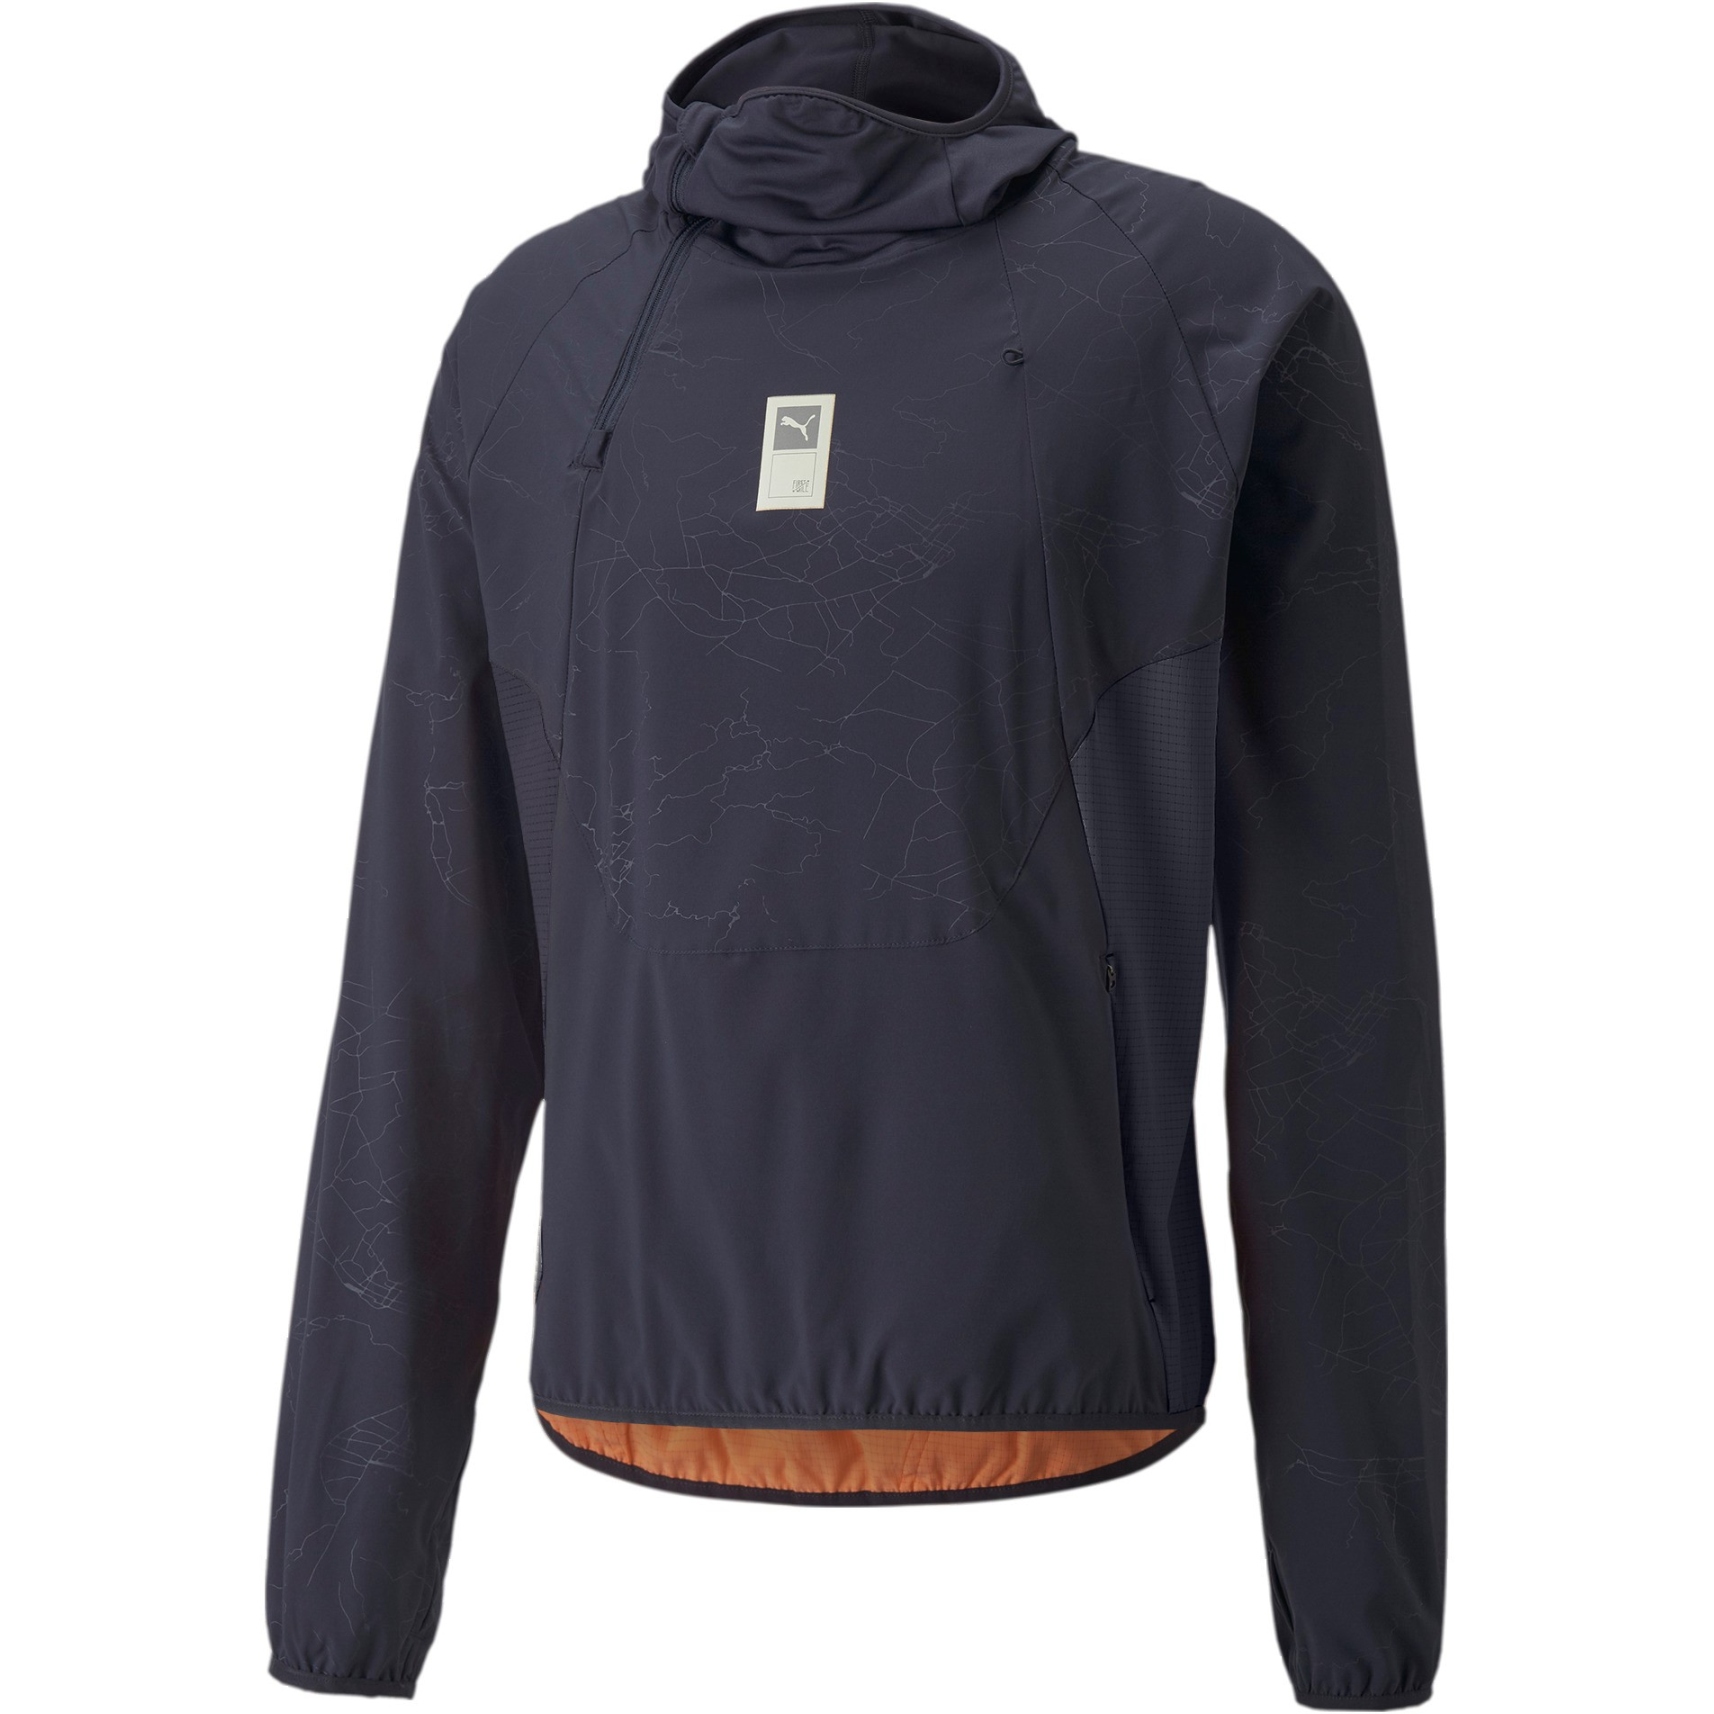 Picture of Puma x FIRST MILE Woven Running Jacket Men - Parisian Night